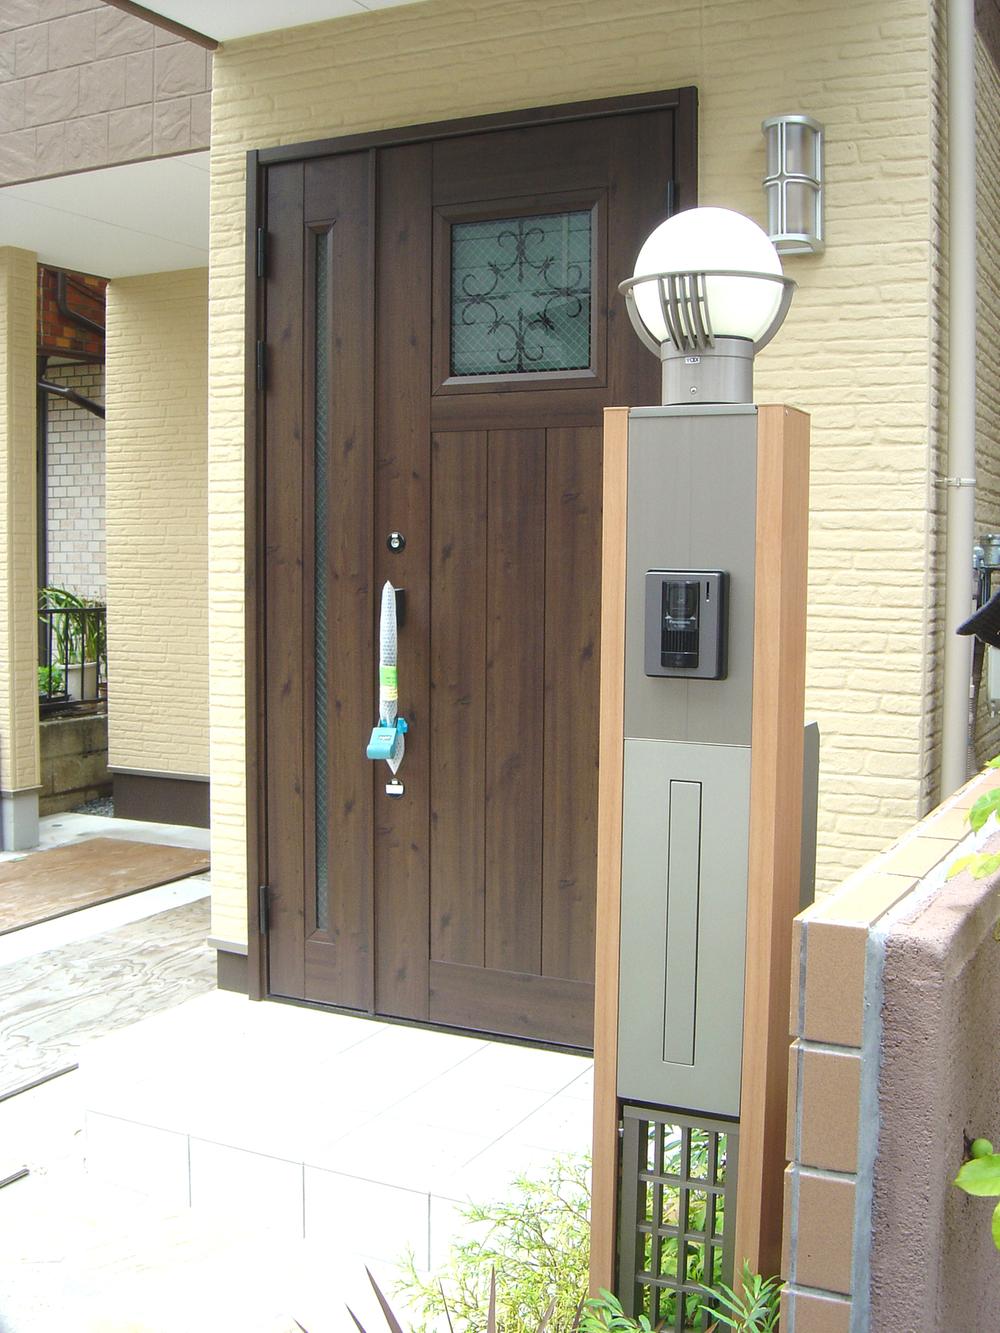 Local appearance photo. Local (July 2013) Shooting. Entrance door